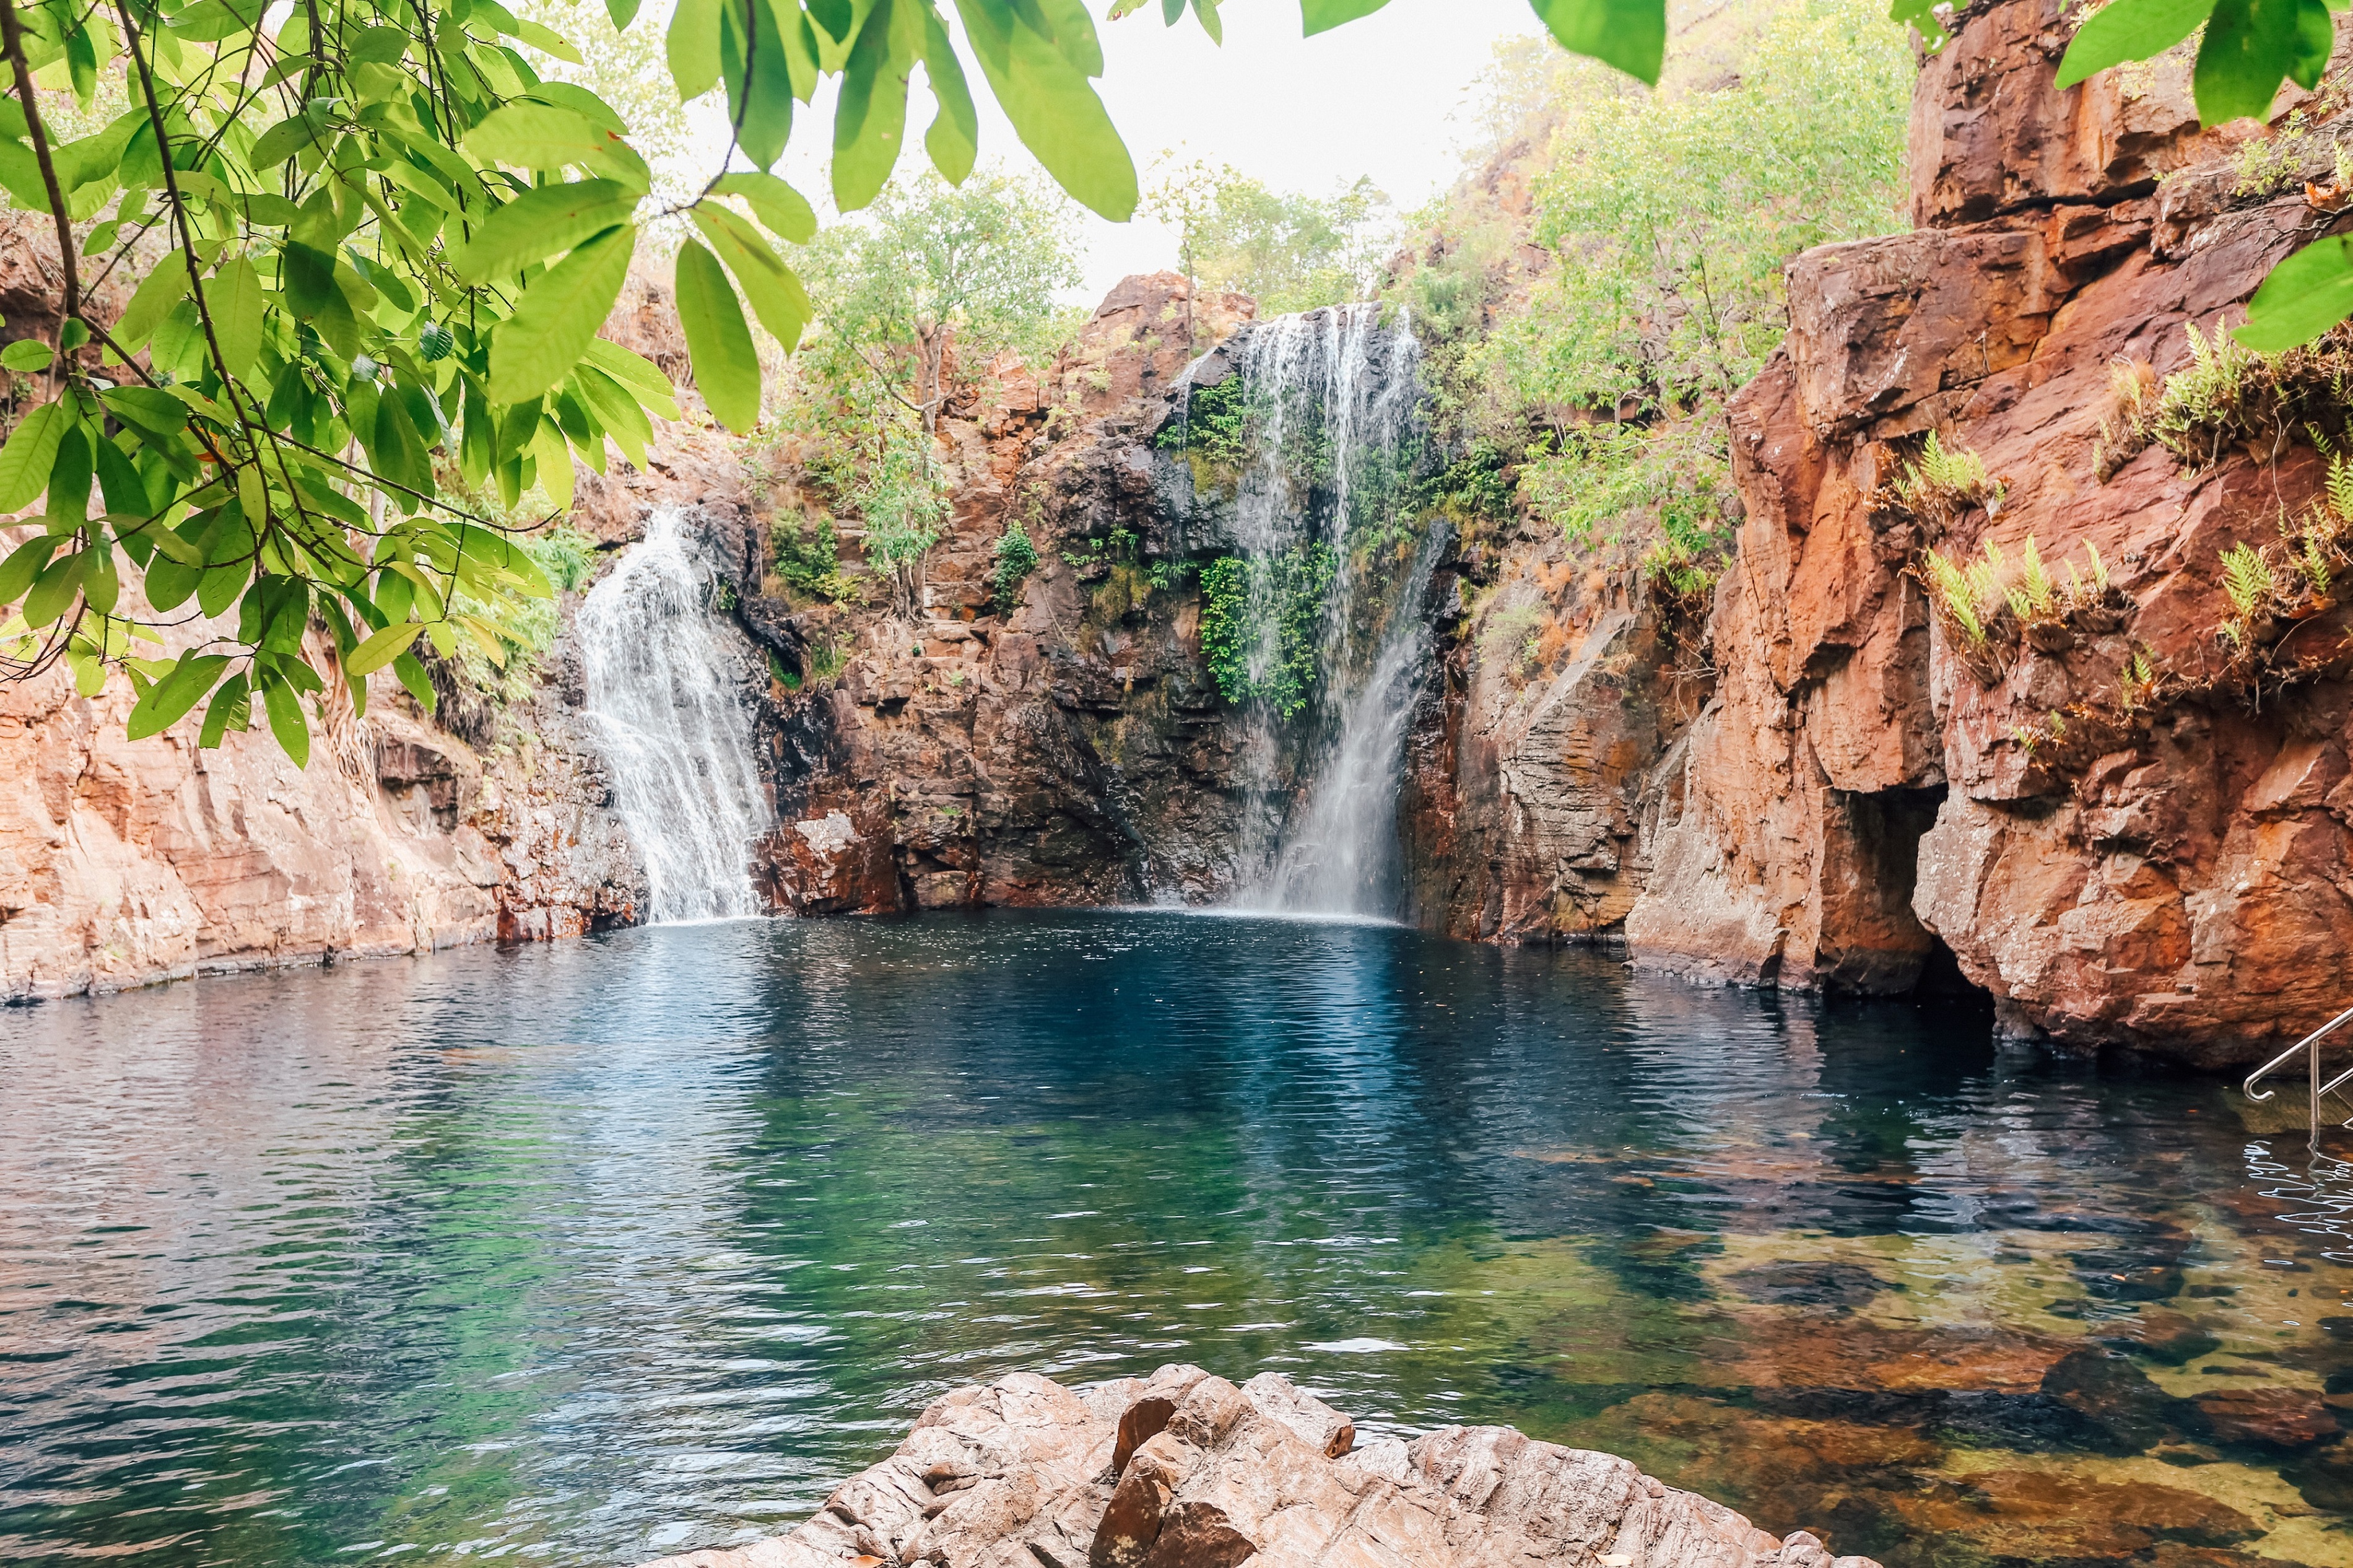 1-Day Tour to Litchfield National Park + Fogg Dam from Darwin